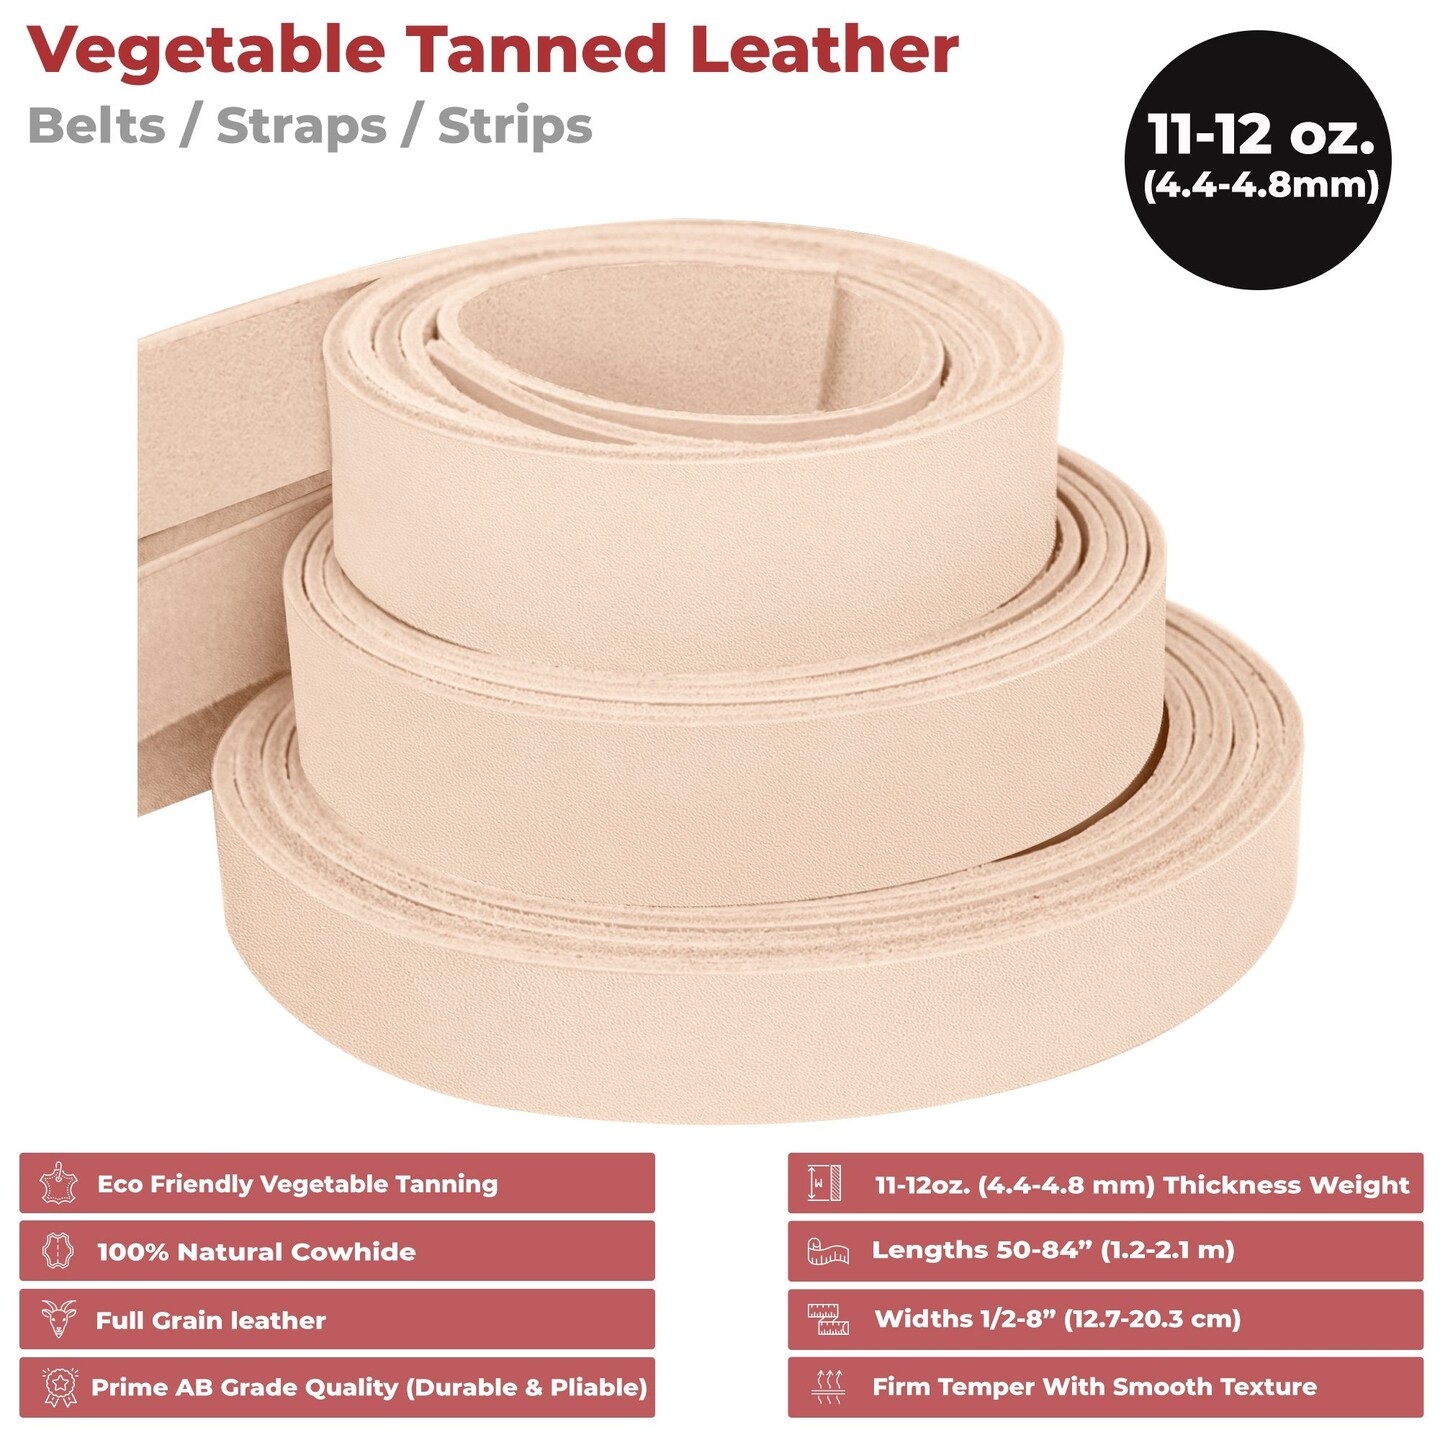 Thick Leather Strip Vegetable Tan Import Cowhide 11-12 oz / 4mm-4.8mm ...